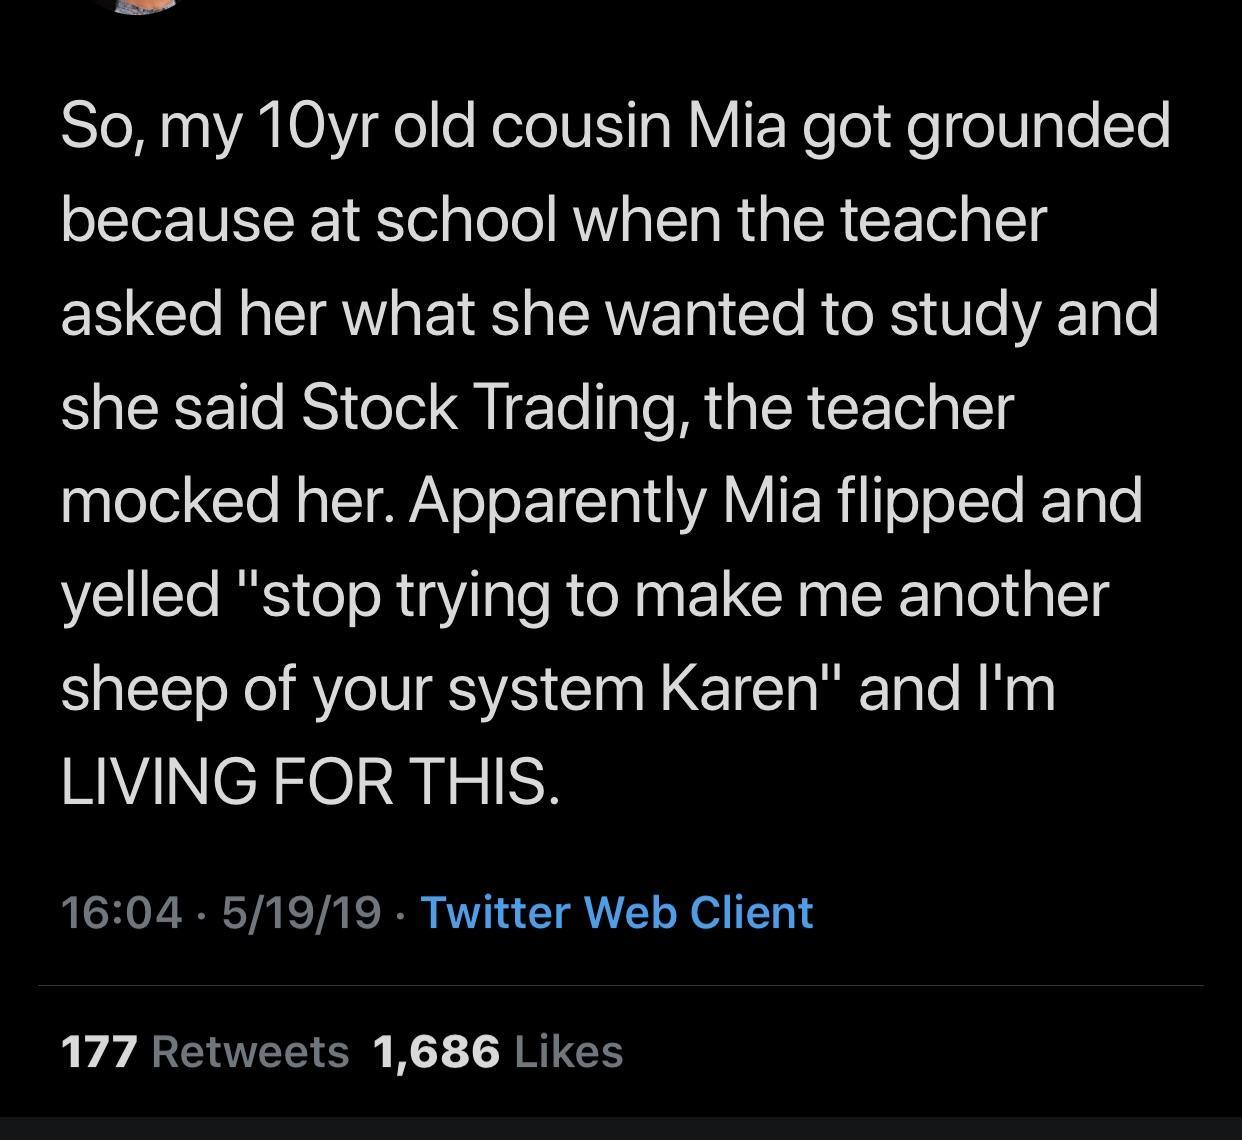 online liars- screenshot - So, my 10yr old cousin Mia got grounded because at school when the teacher asked her what she wanted to study and she said Stock Trading, the teacher mocked her. Apparently Mia flipped and yelled "stop trying to make me another 